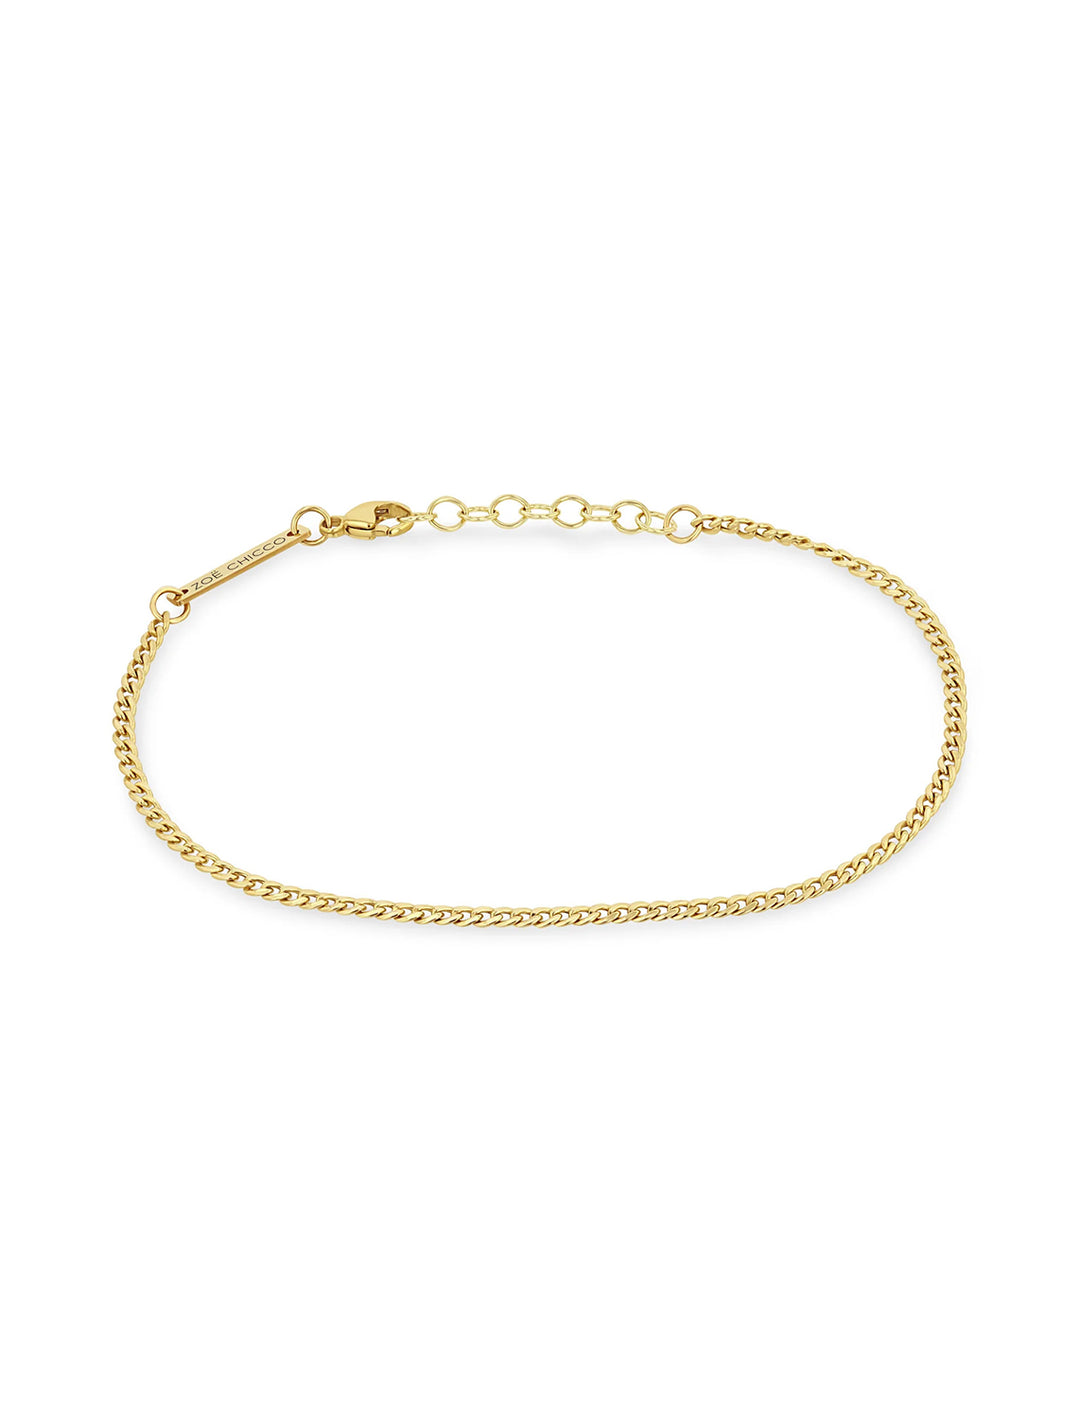 Front view of Zoe Chicco's 14k xs curb chain bracelet.